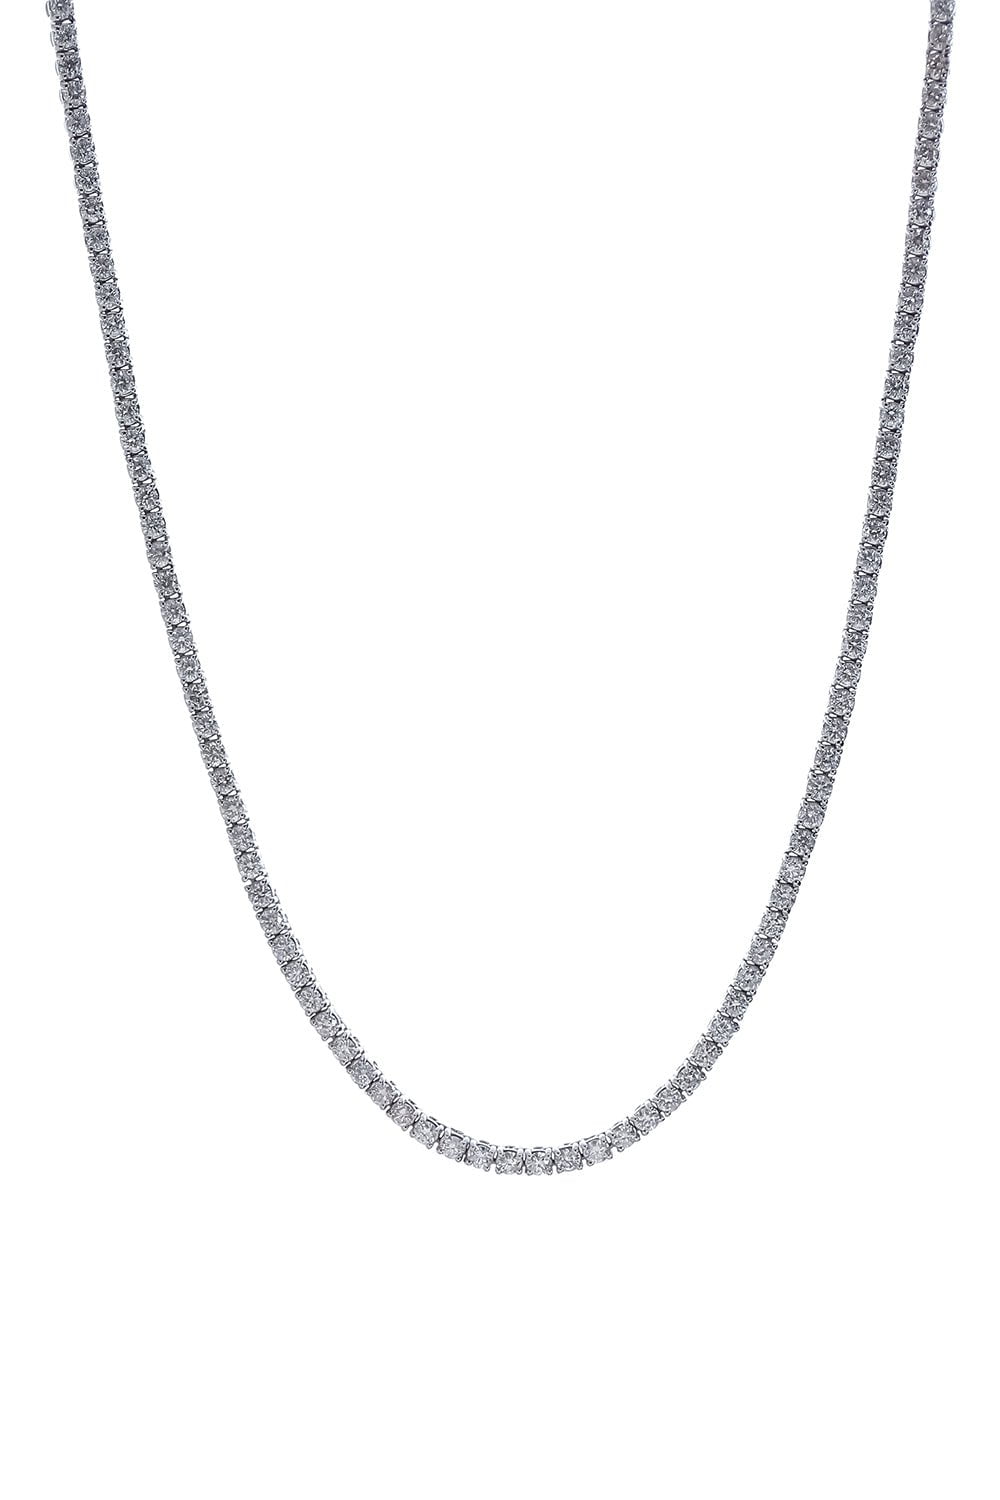 DIANA M. JEWELS-Classic Tennis Necklace-WHITE GOLD